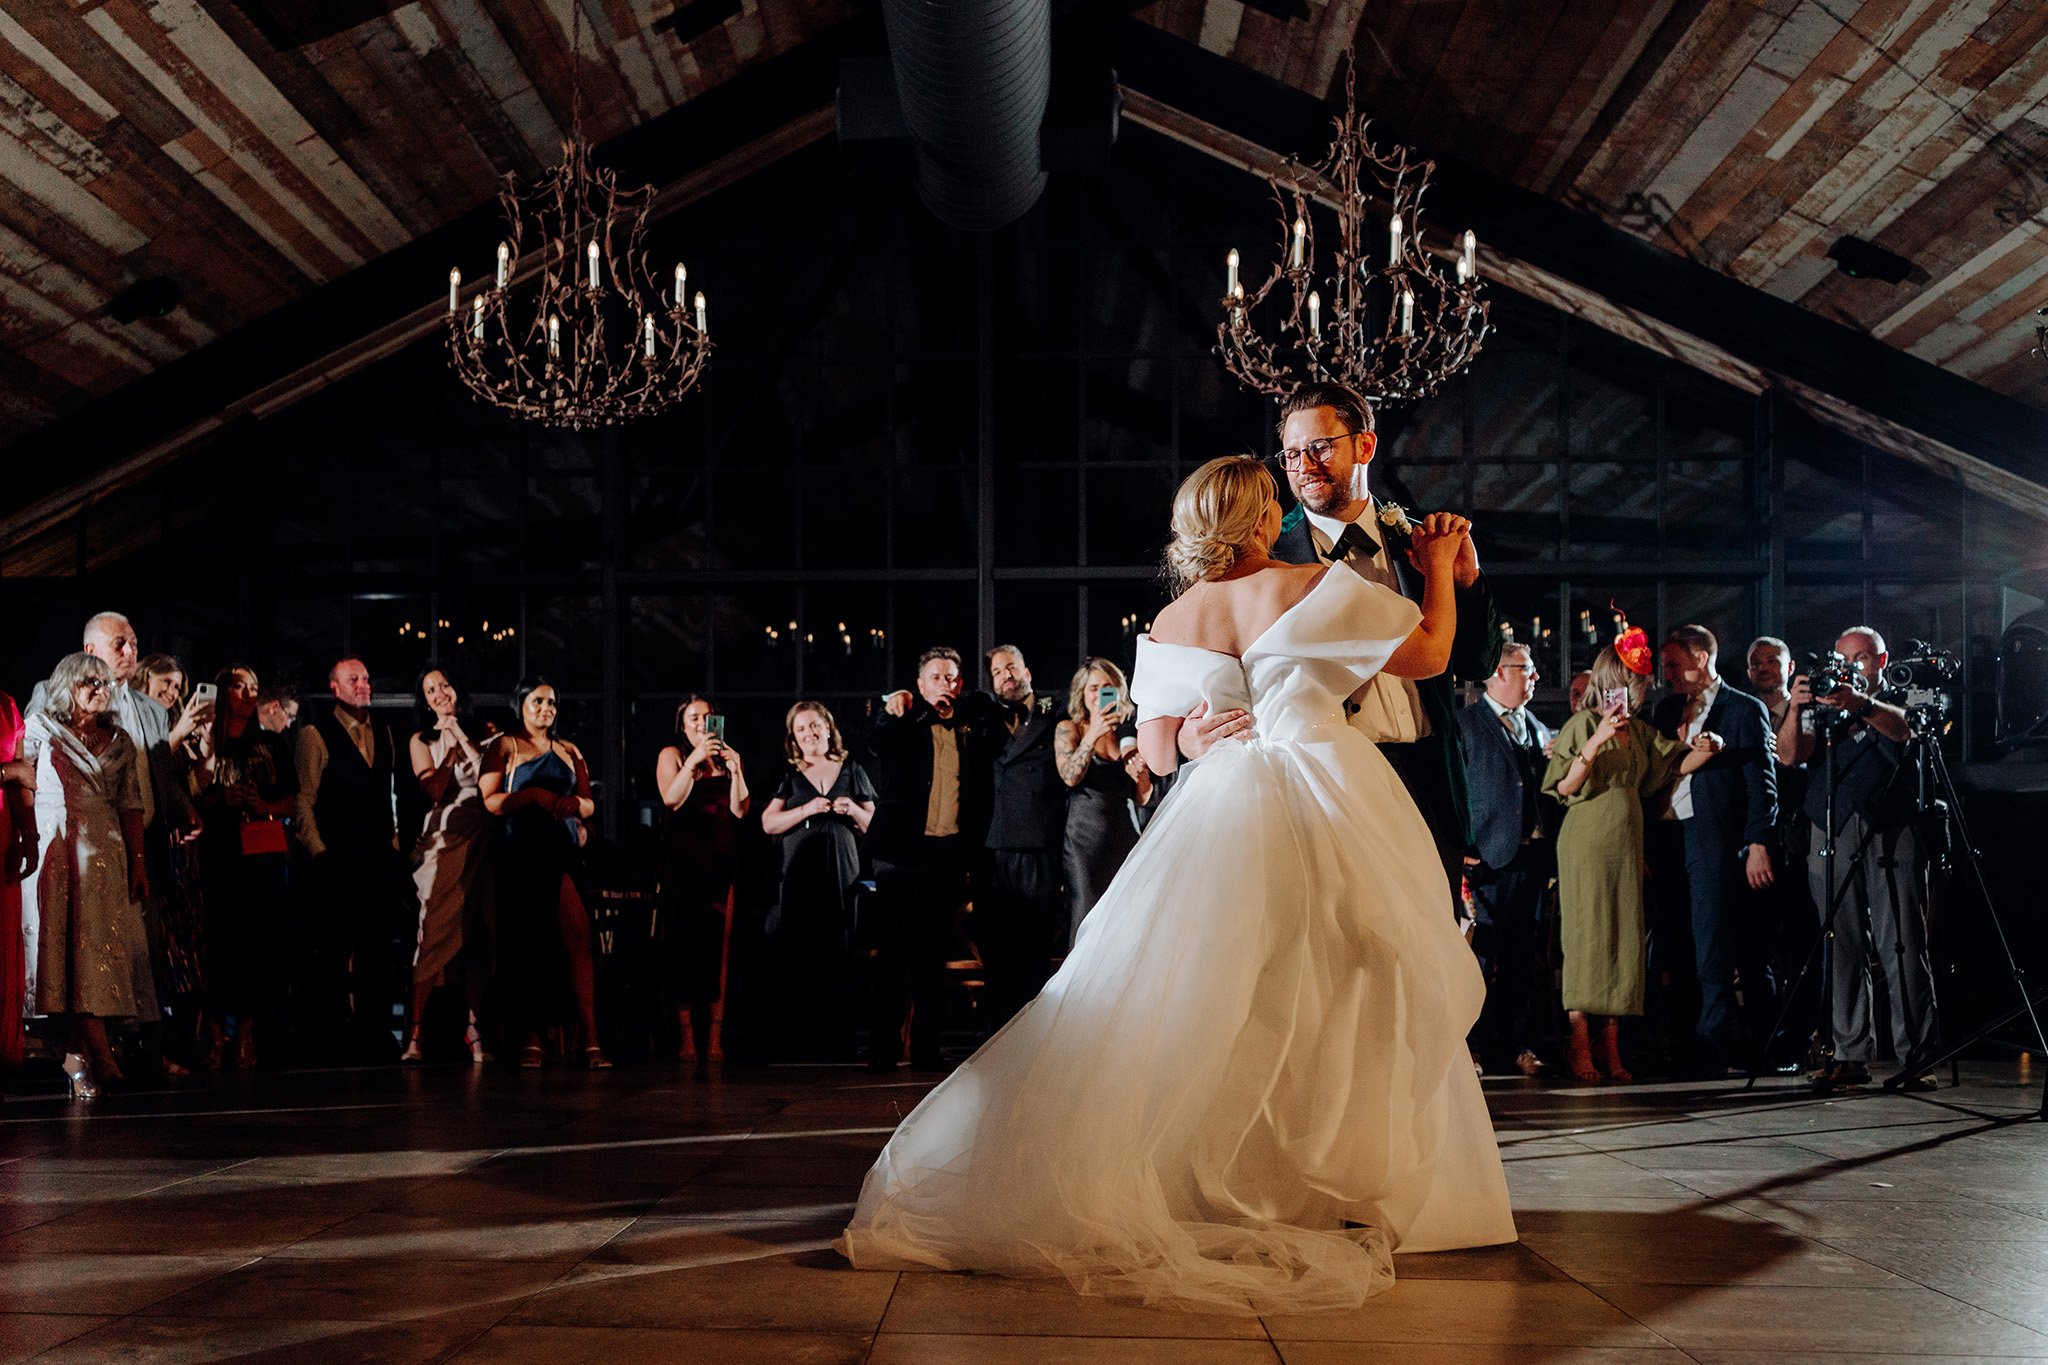 First dance at The Barn at Botley Hill